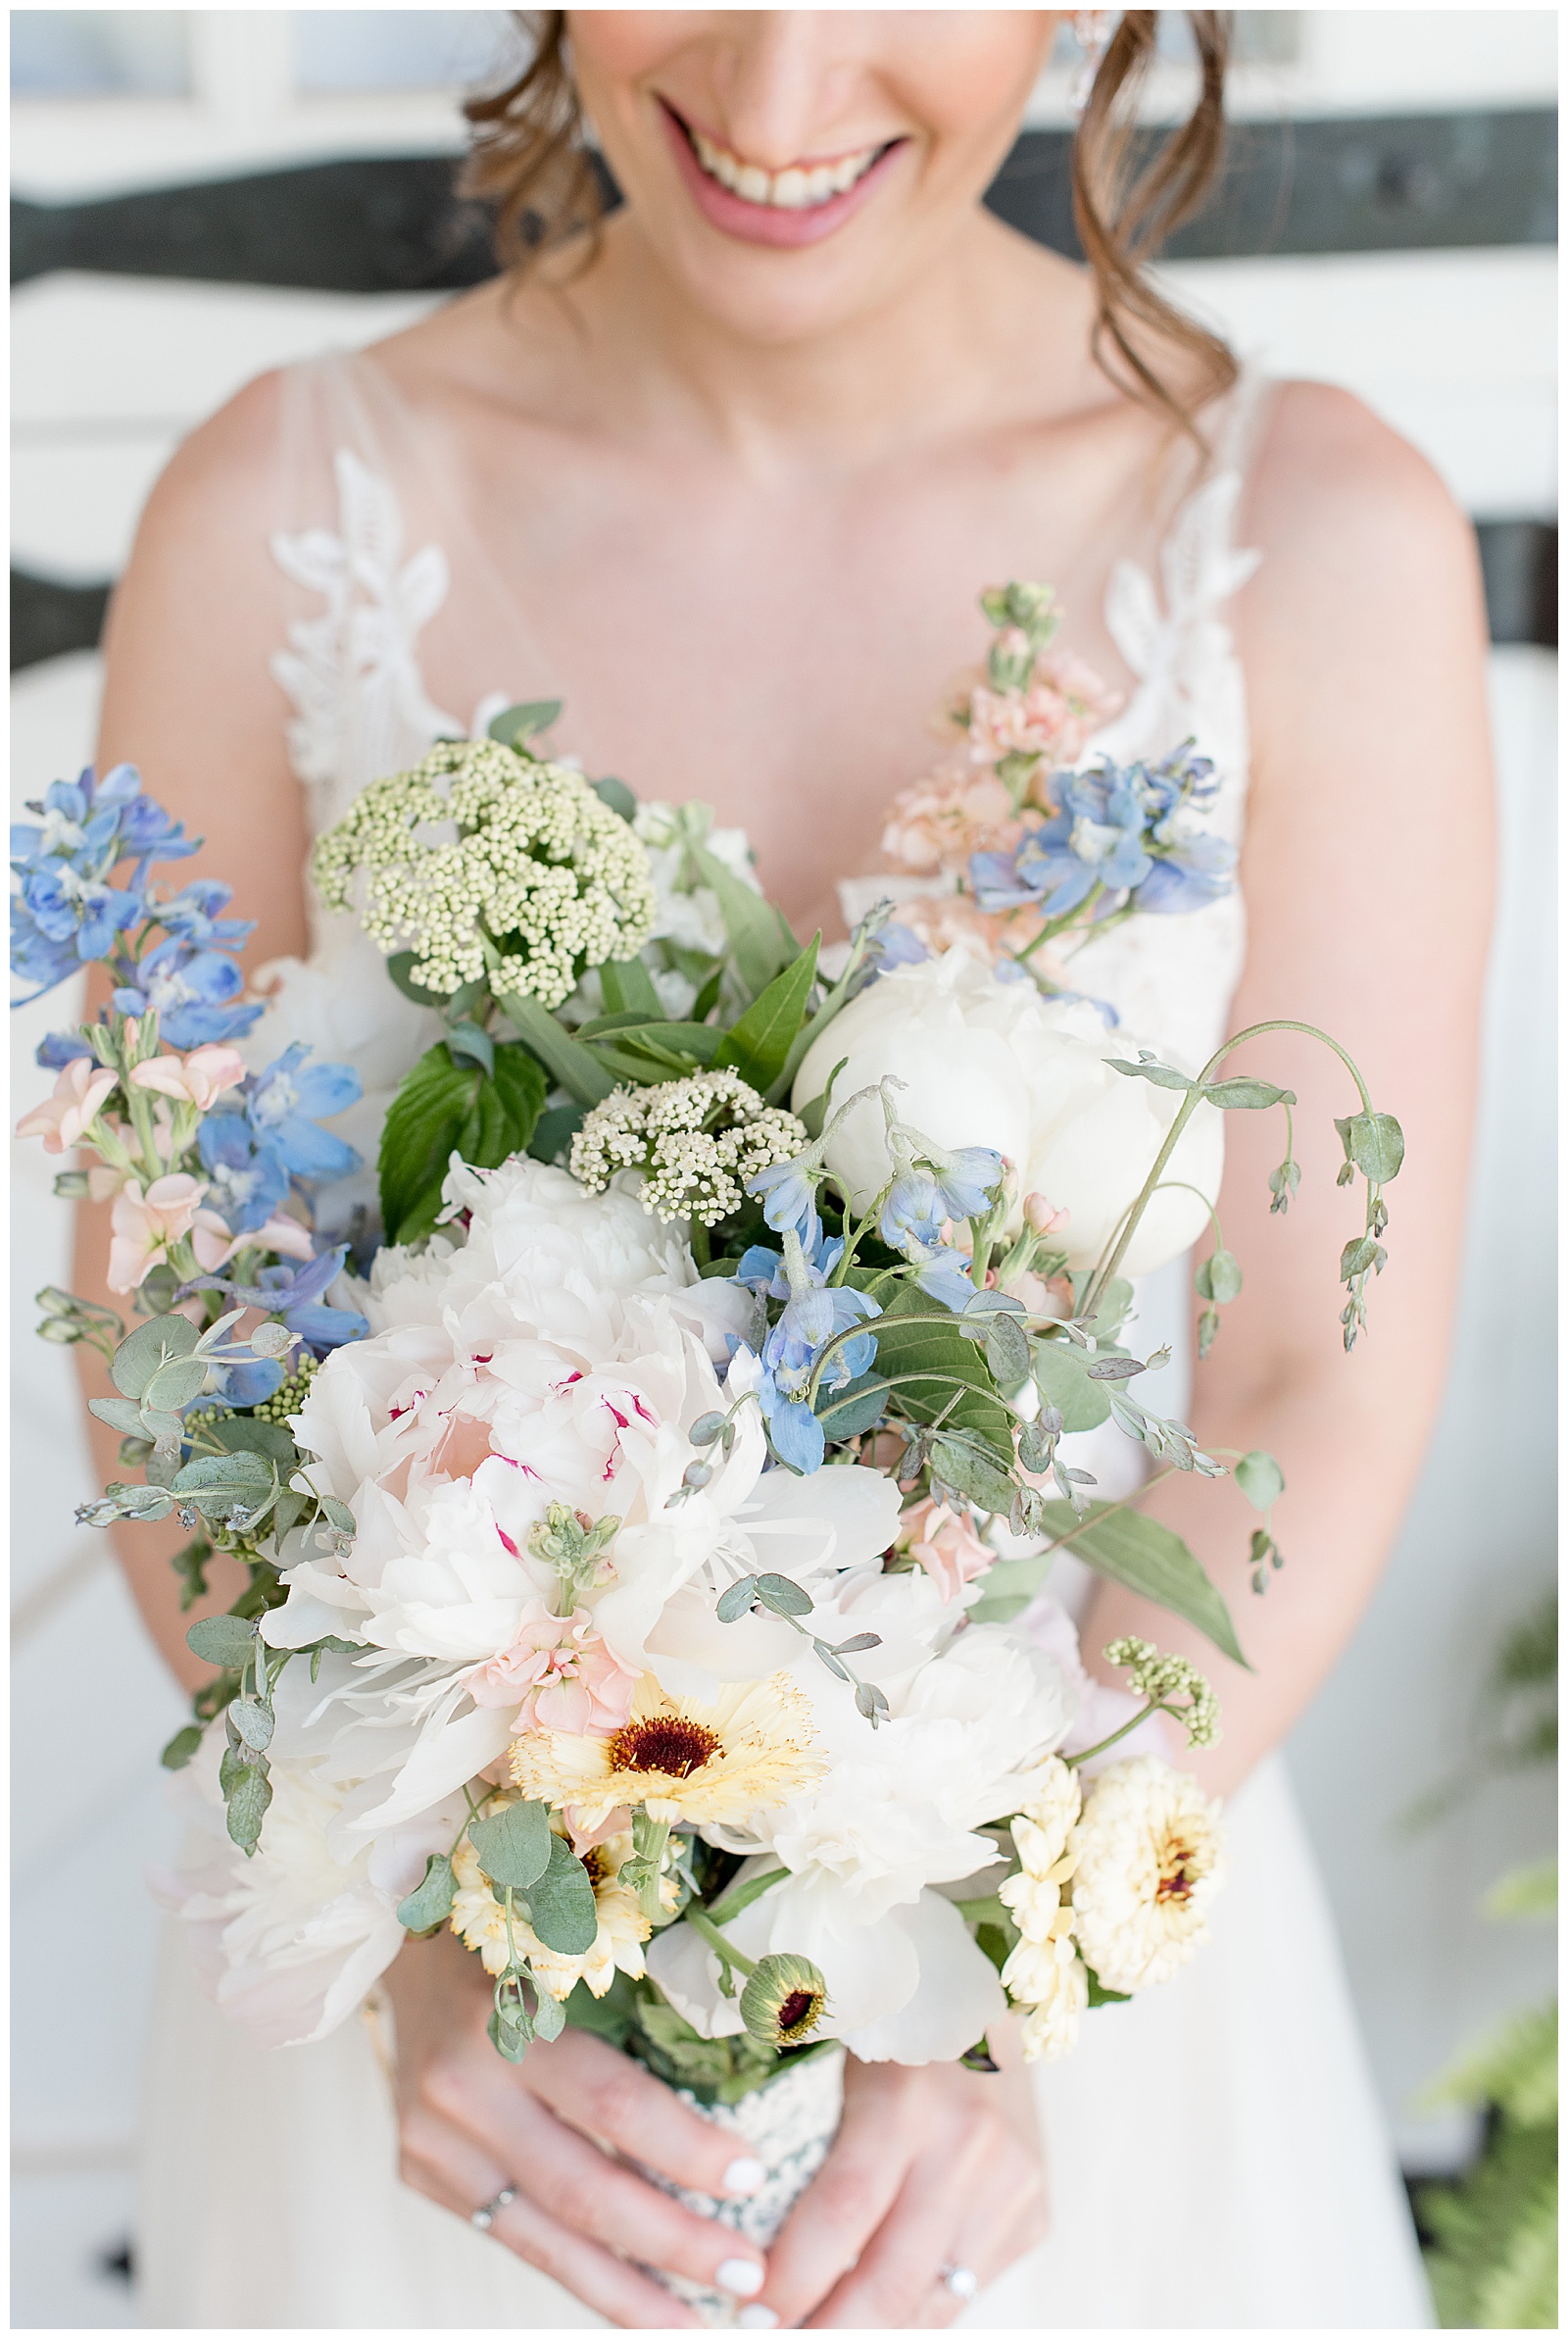 gorgeous wedding bouquet held by the bride